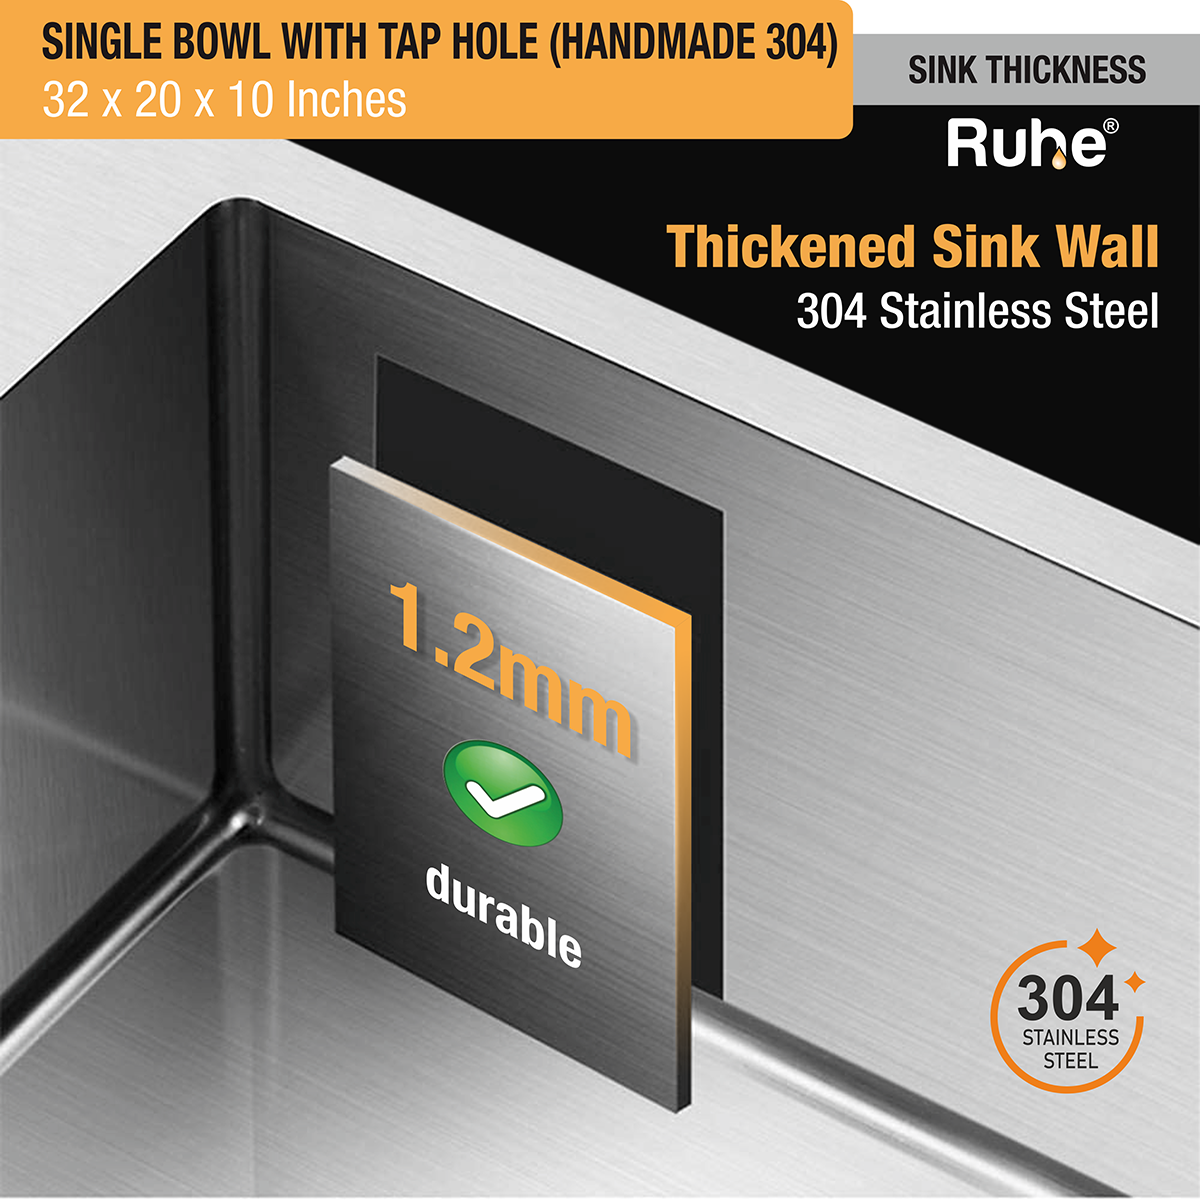 Handmade Single Bowl 304-Grade Kitchen Sink (32 x 20 x 10 Inches) with Tap Hole stainless steel thickness